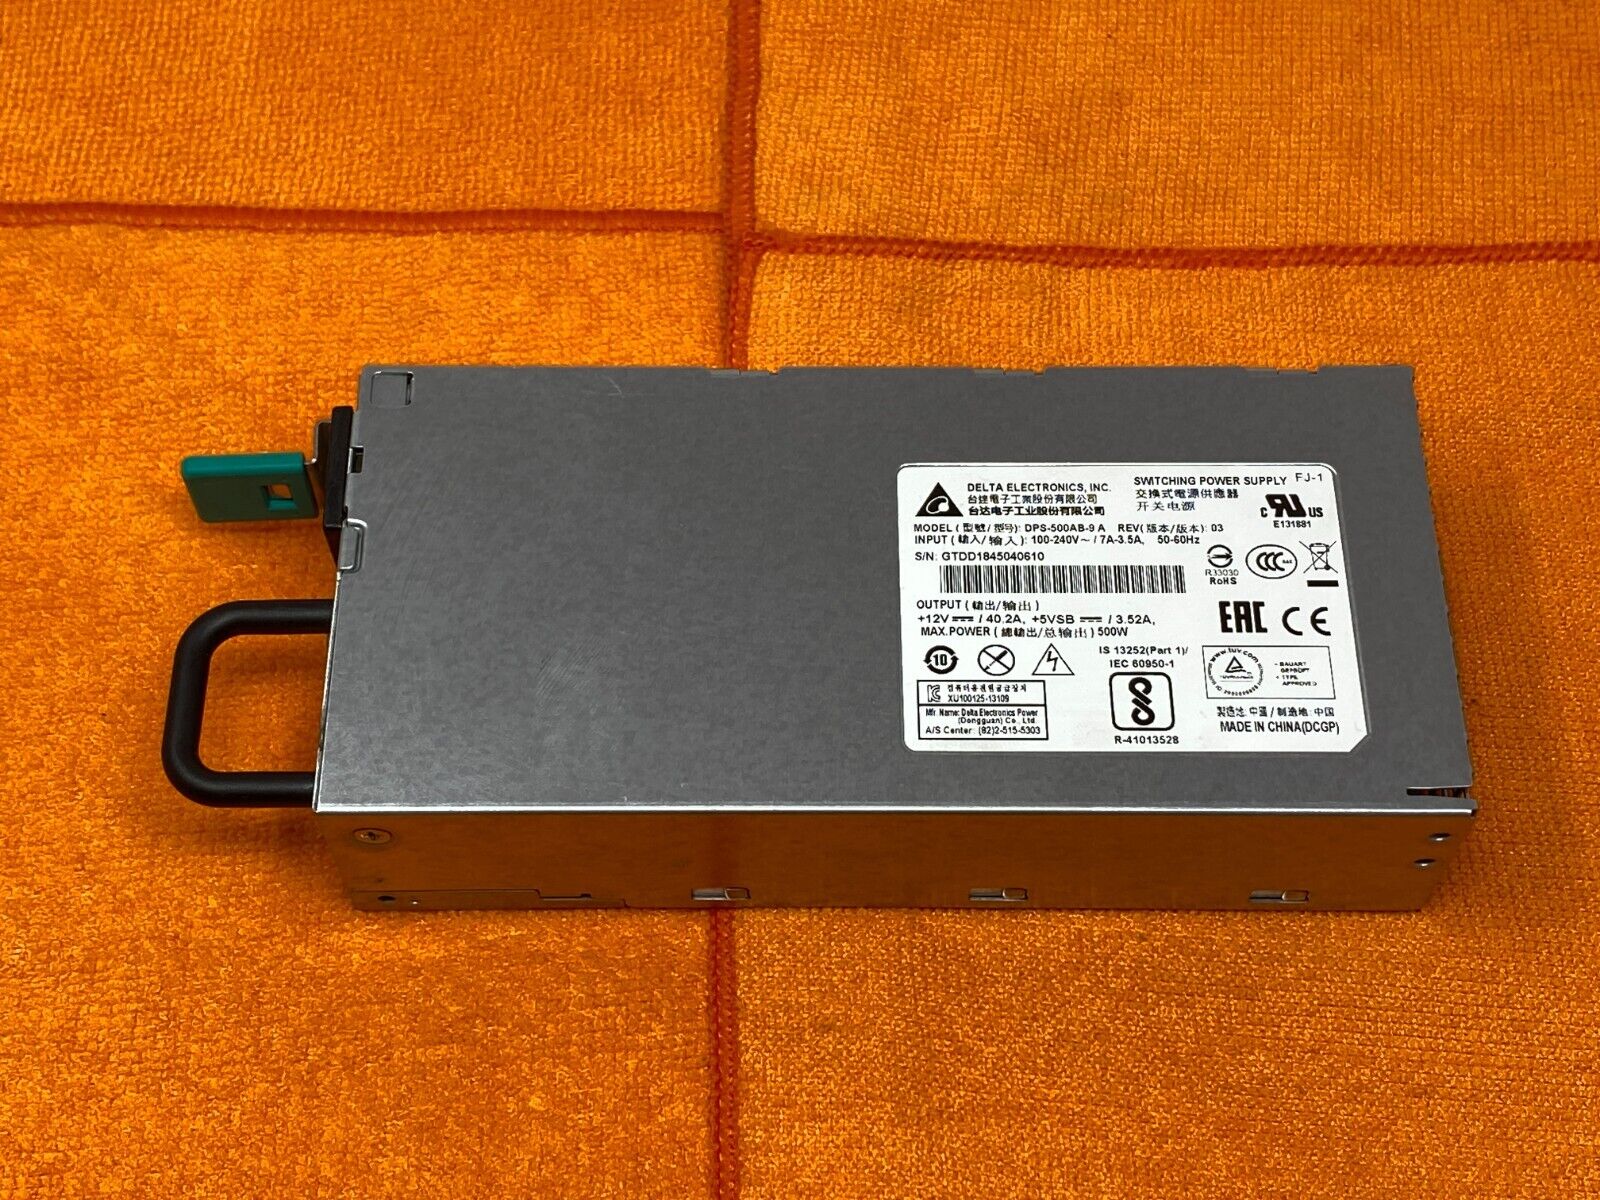 DELTA CRPS 500WATT SWITCHING POWER SUPPLY DPS-500AB-9 A FOR SYNOLOGY